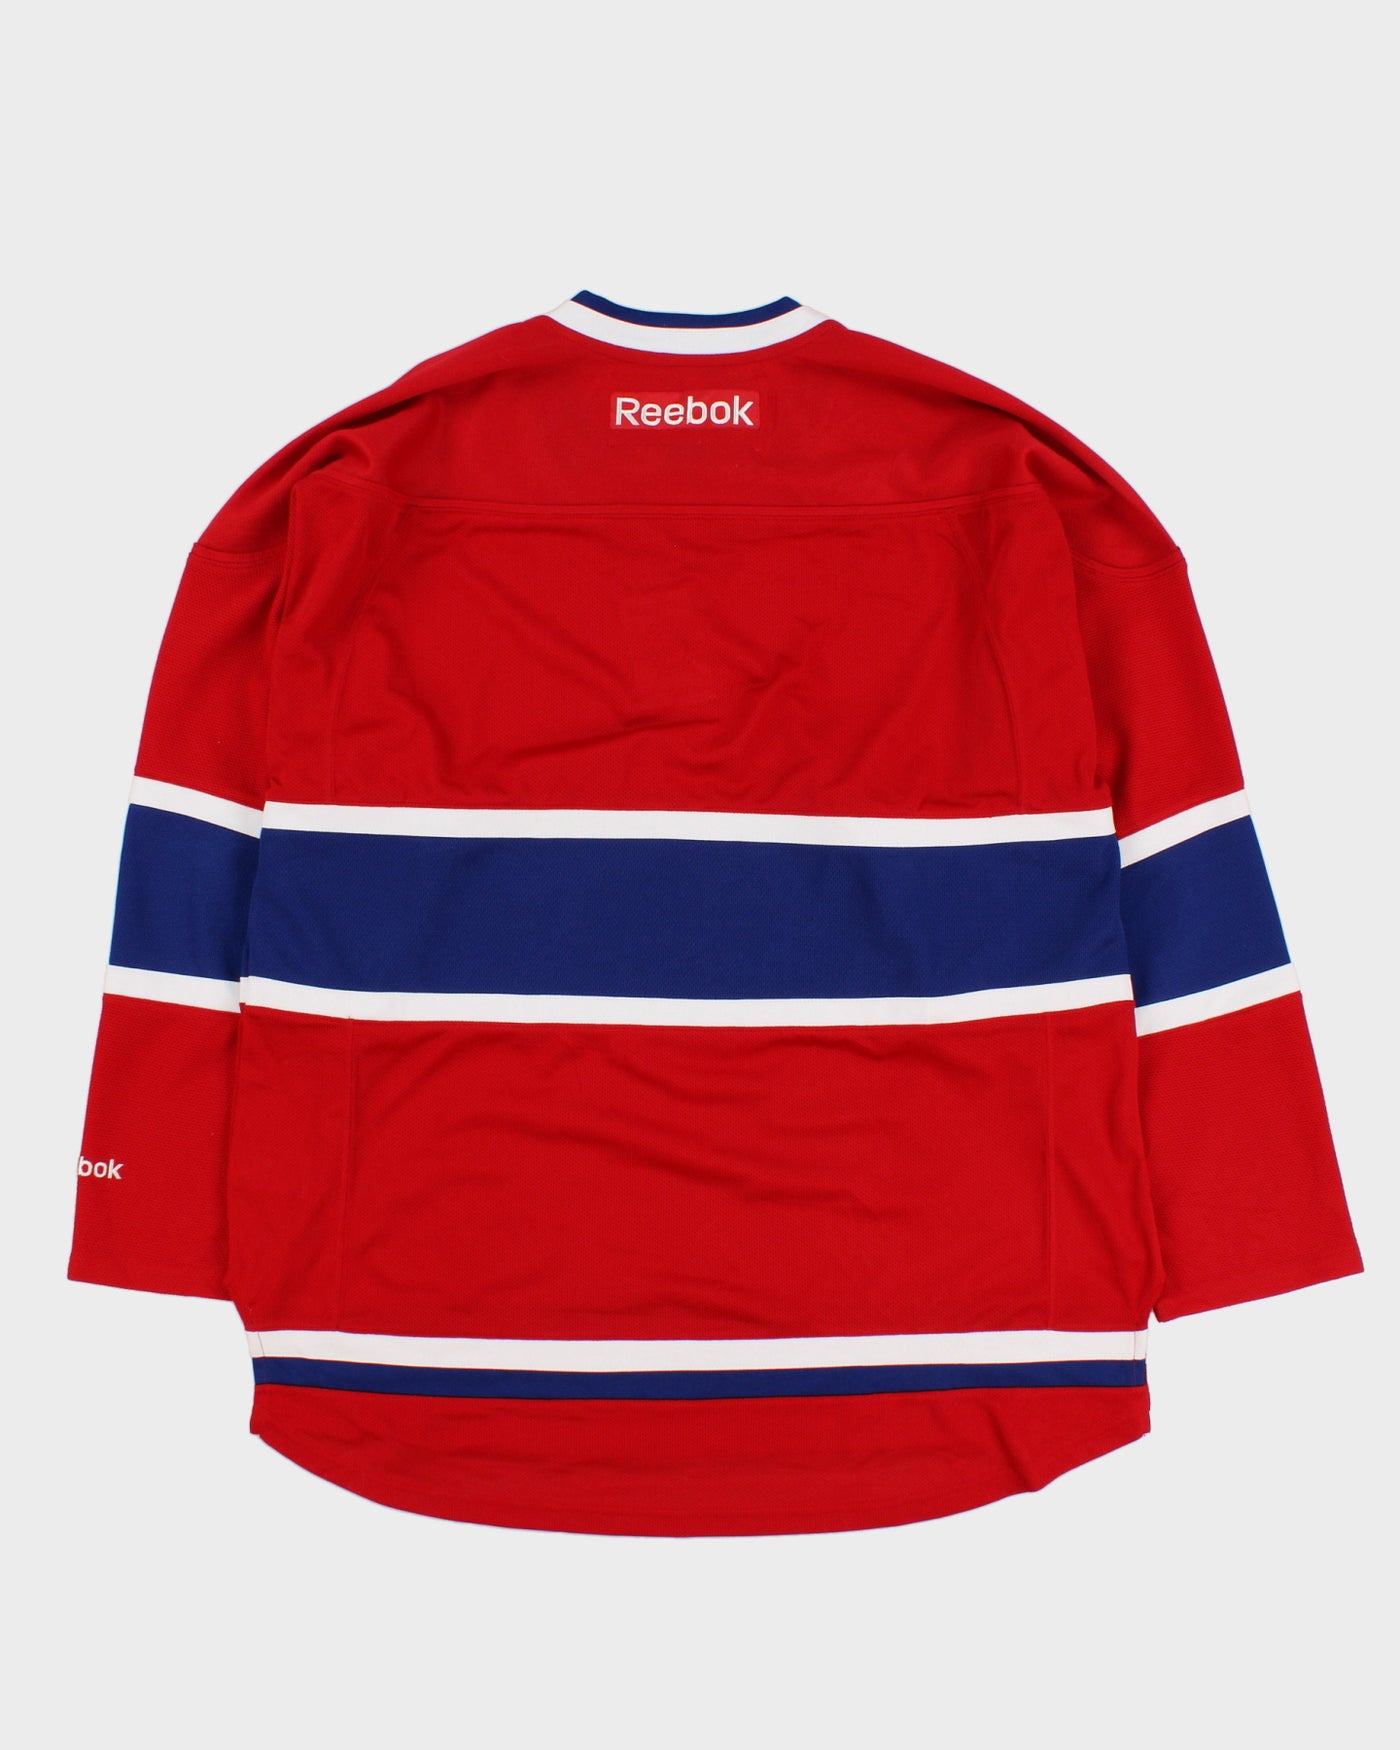 Montreal Canadiens NHL Jersey - XL